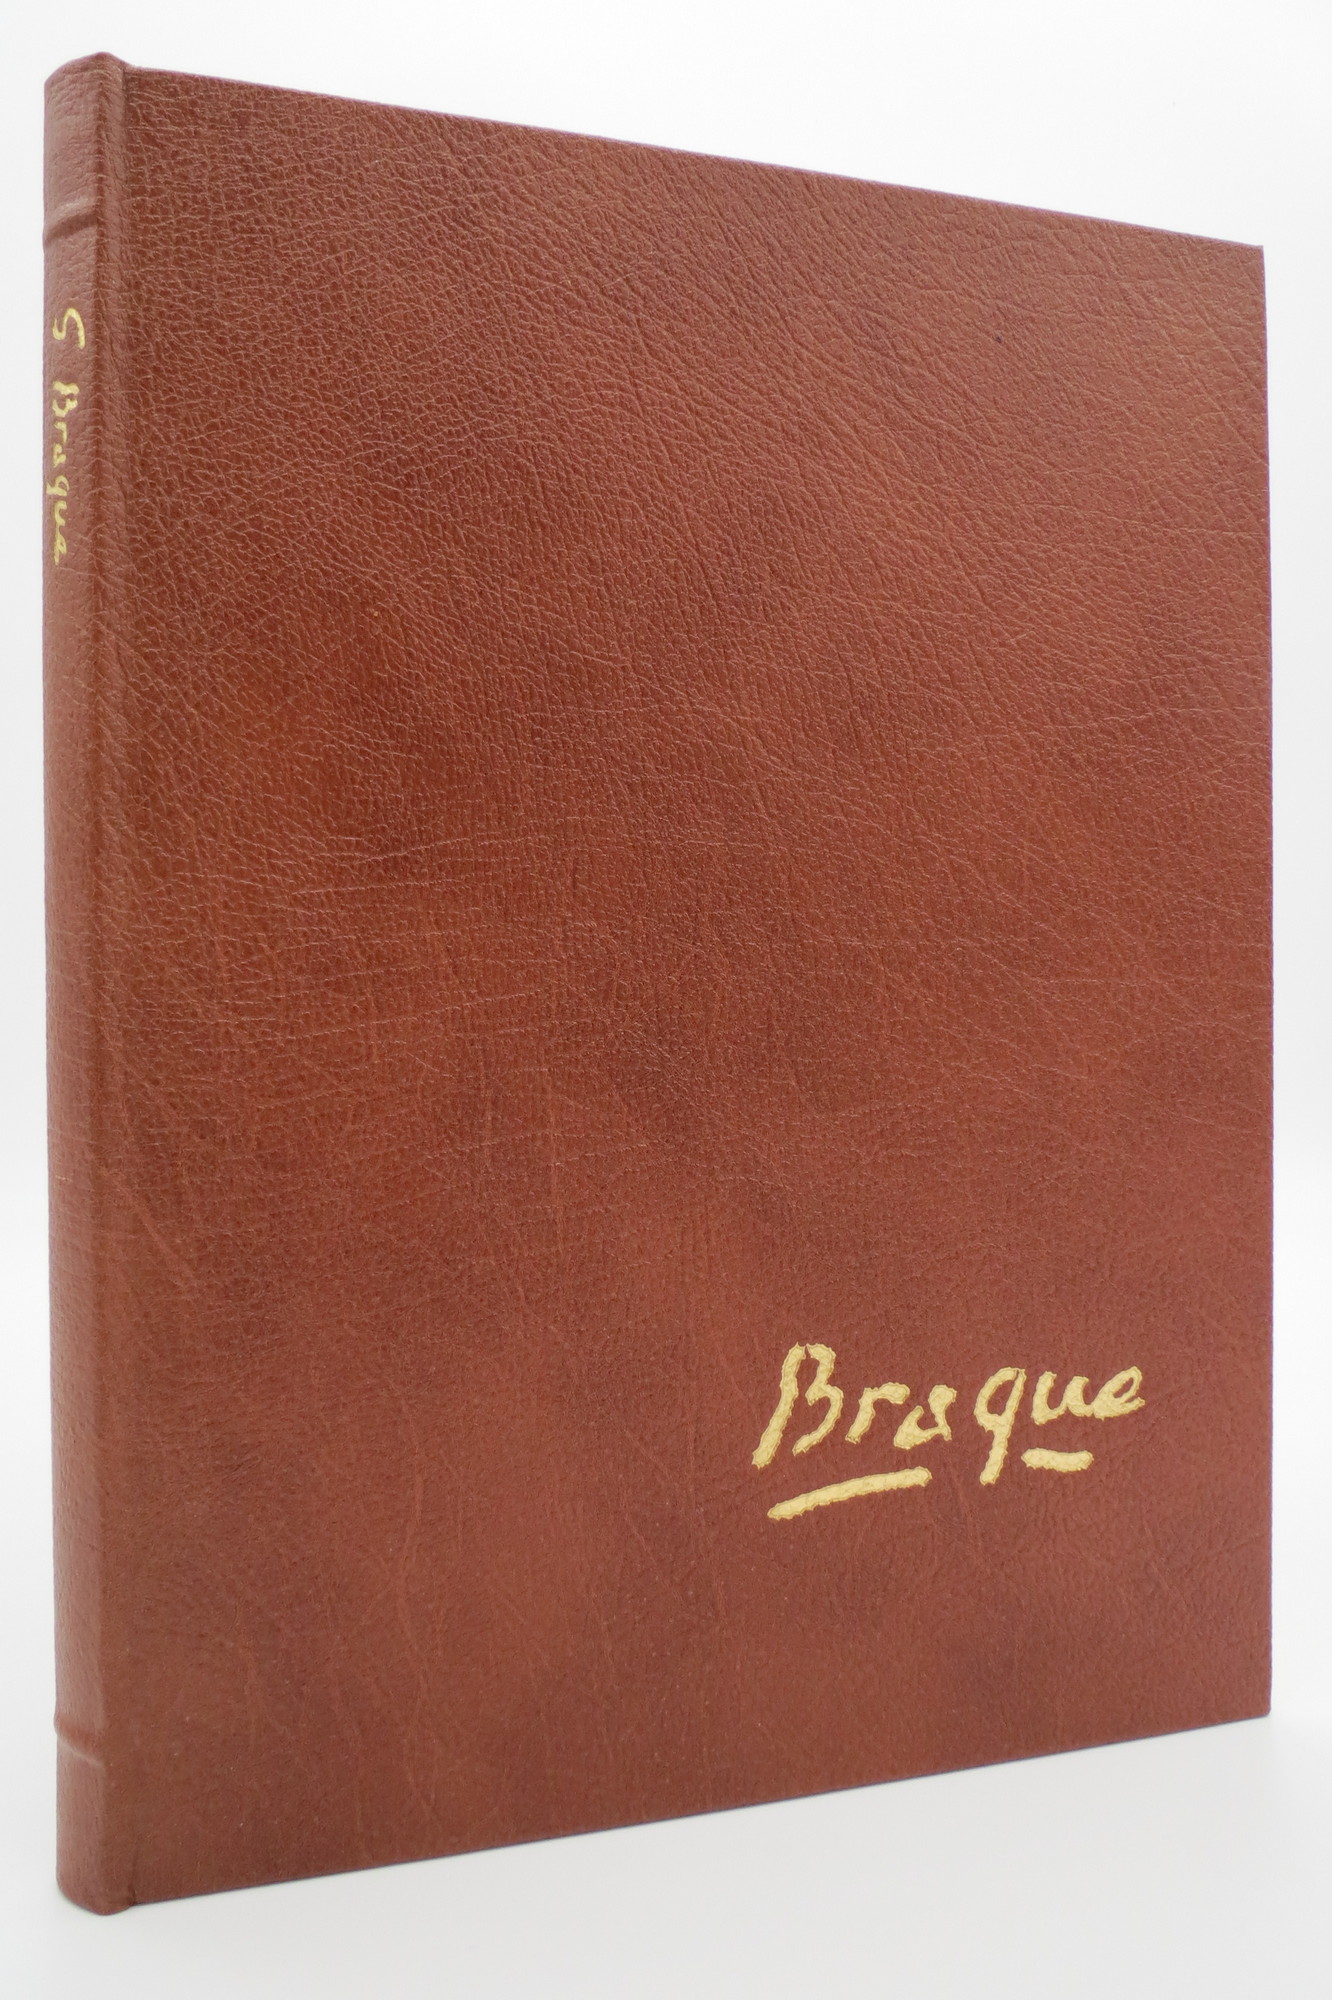 Image for BRAQUE (GREAT ART AND ARTISTS)  (Leather Bound)  (Provenance: Israeli Artist Avraham Loewenthal)